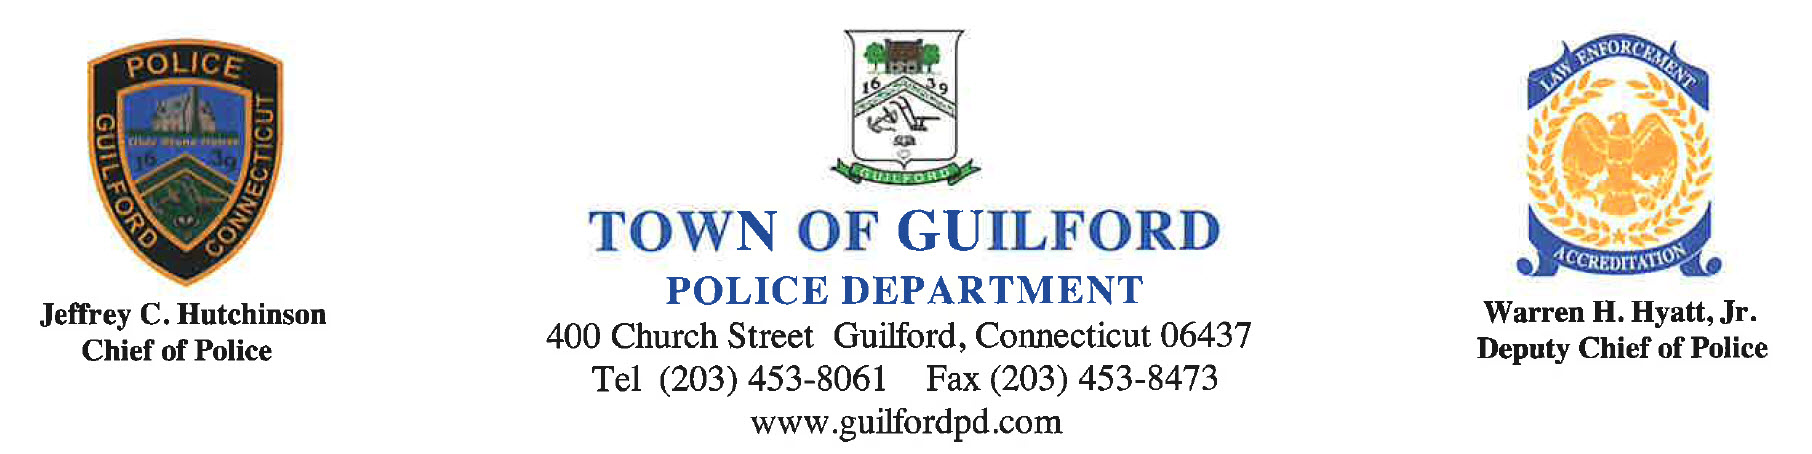 Guilford Police Department, CT Public Safety Jobs